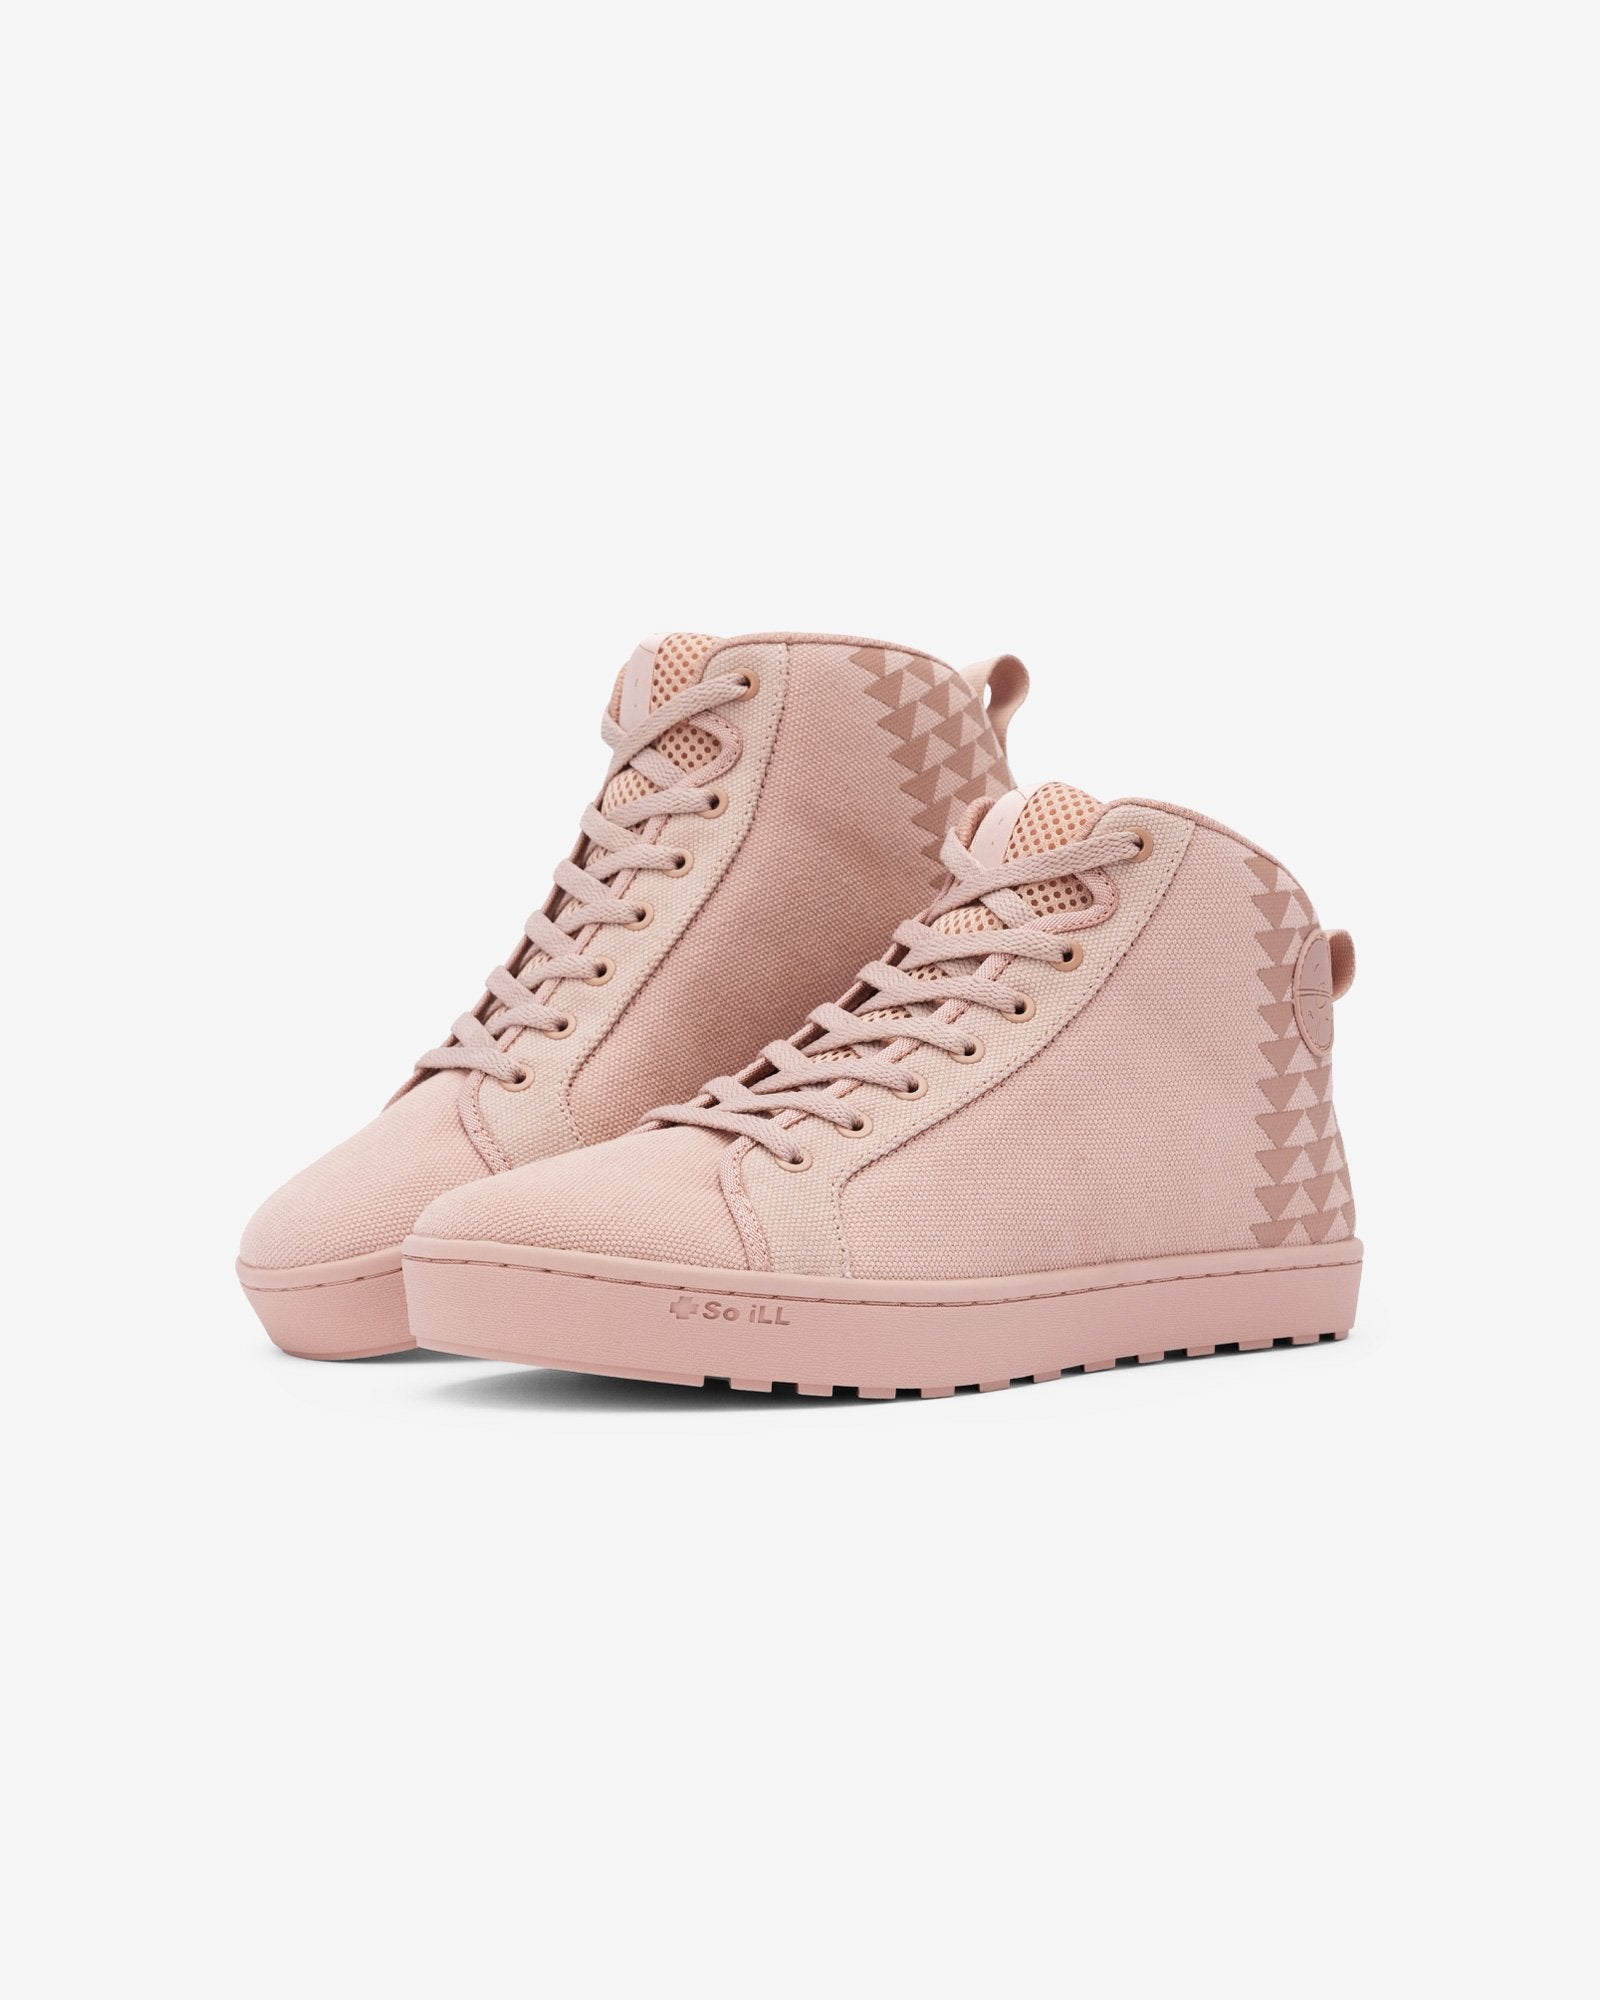 Cotton on Kids Hunter High Top Trainer